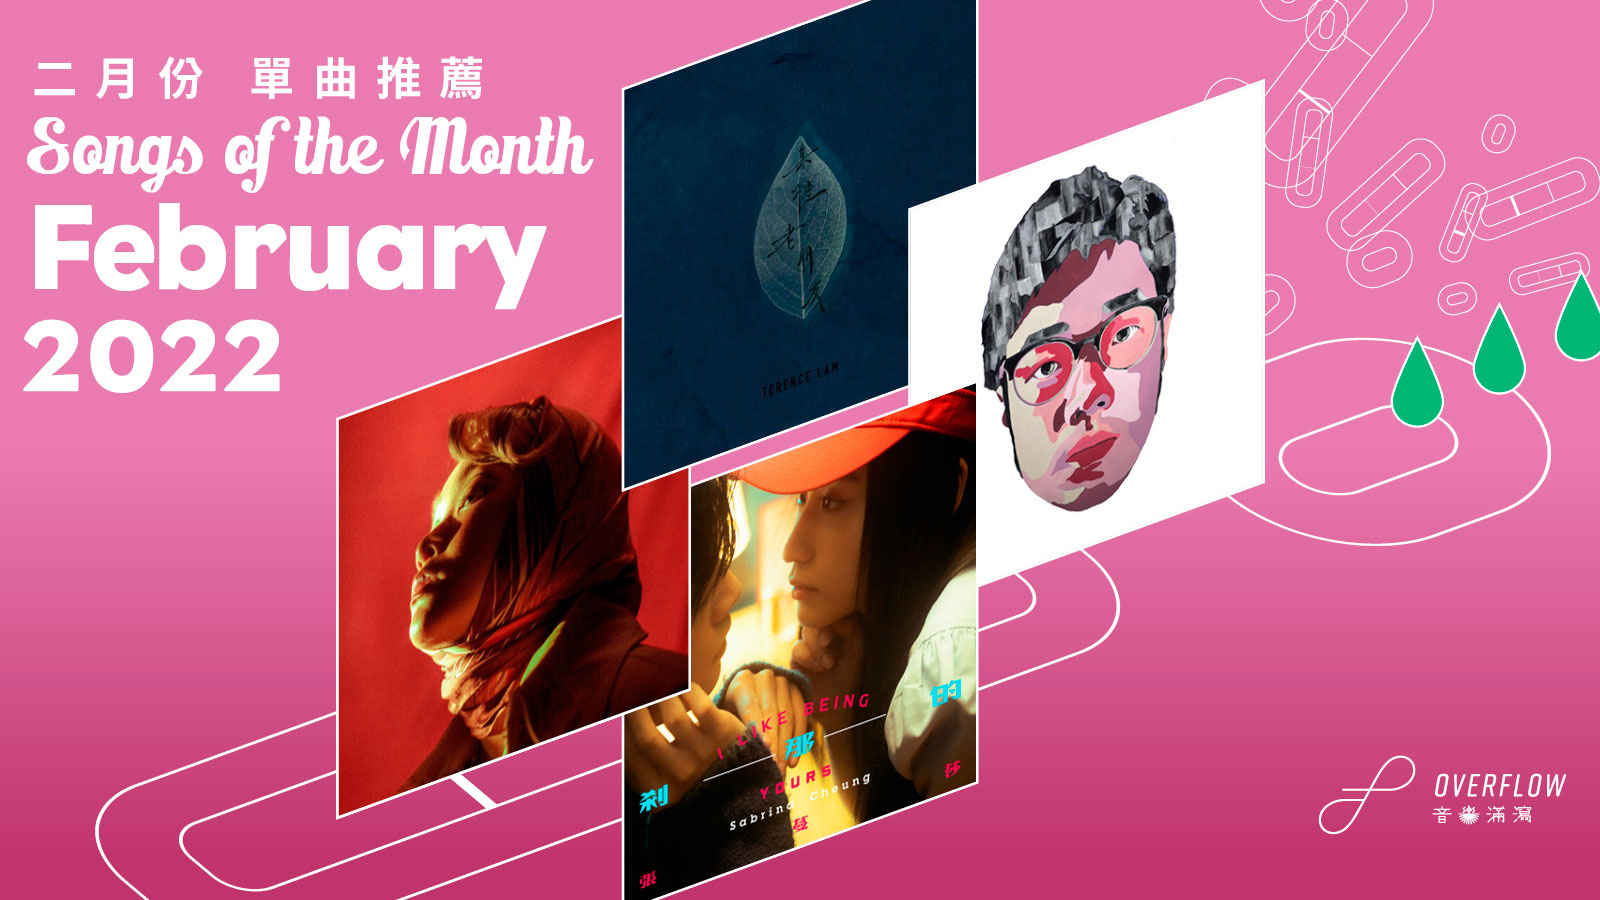 【Songs of the Month】2022 年 2 月本地歌曲推薦